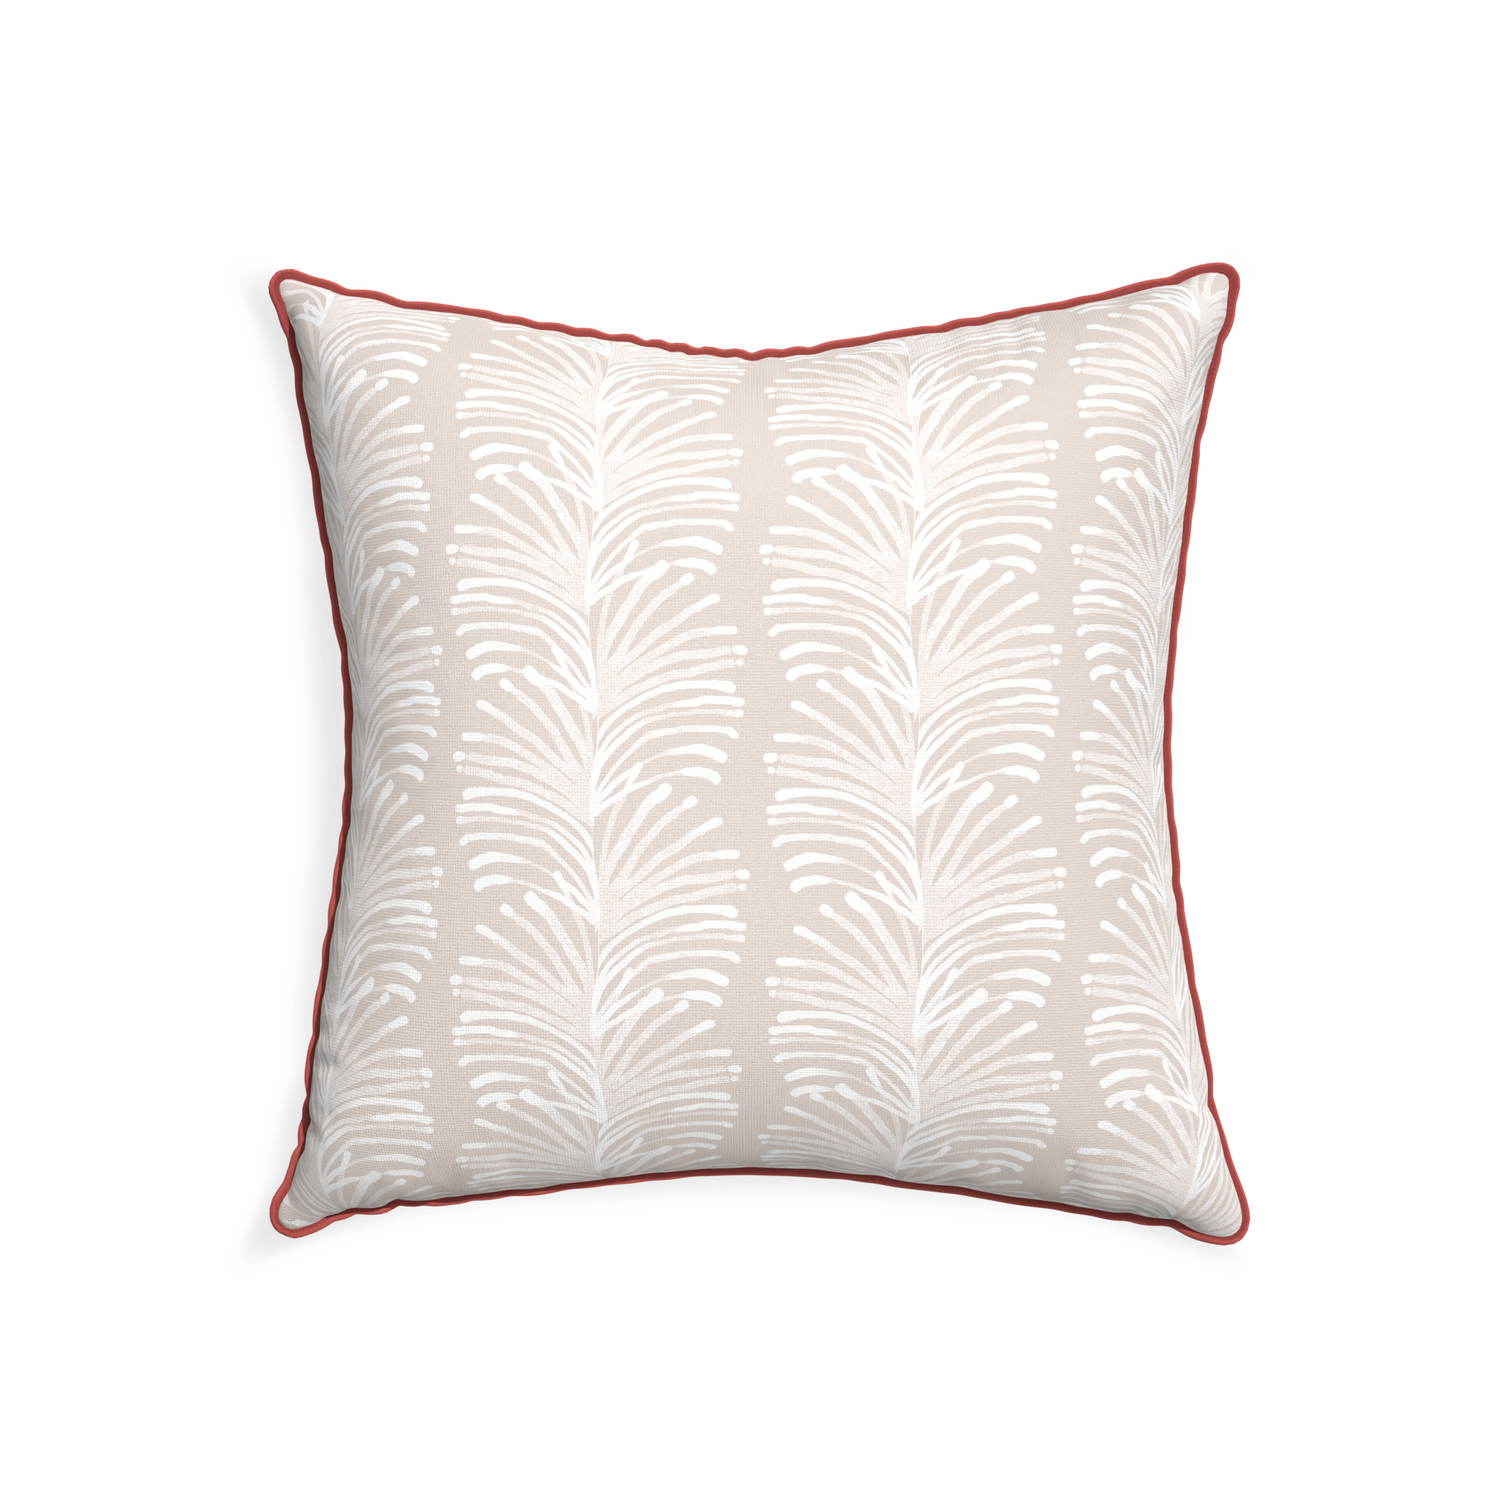 22-square emma sand custom sand colored botanical stripepillow with c piping on white background